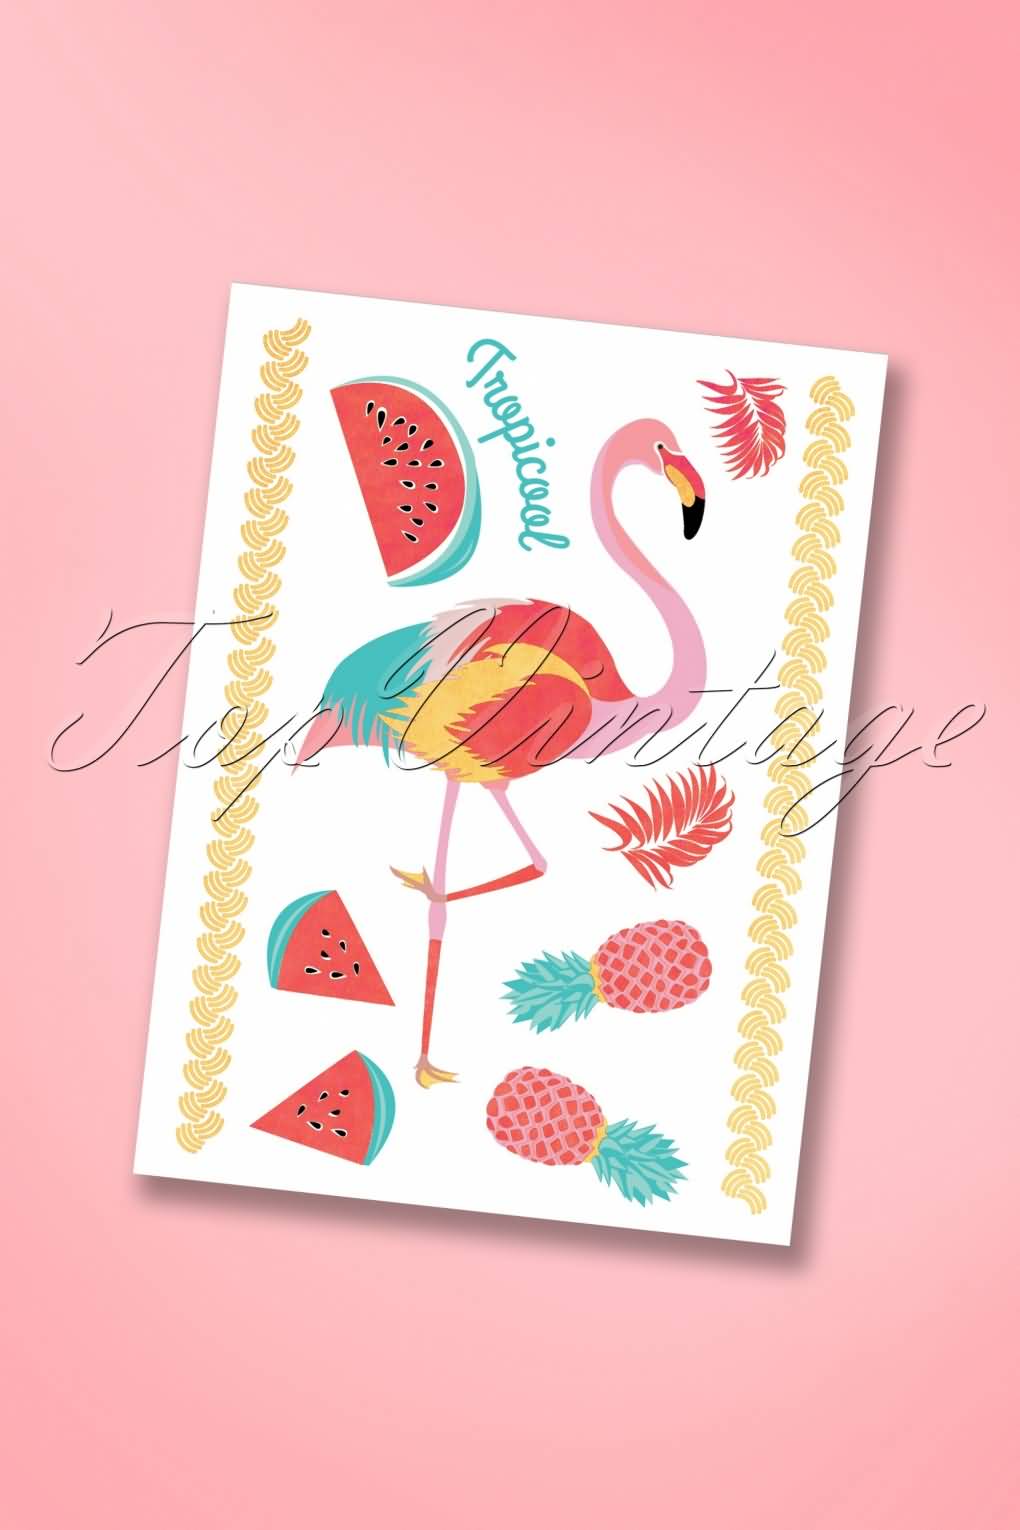 Flamingo With Pineapples And Watermelon Pieces Tattoo Design